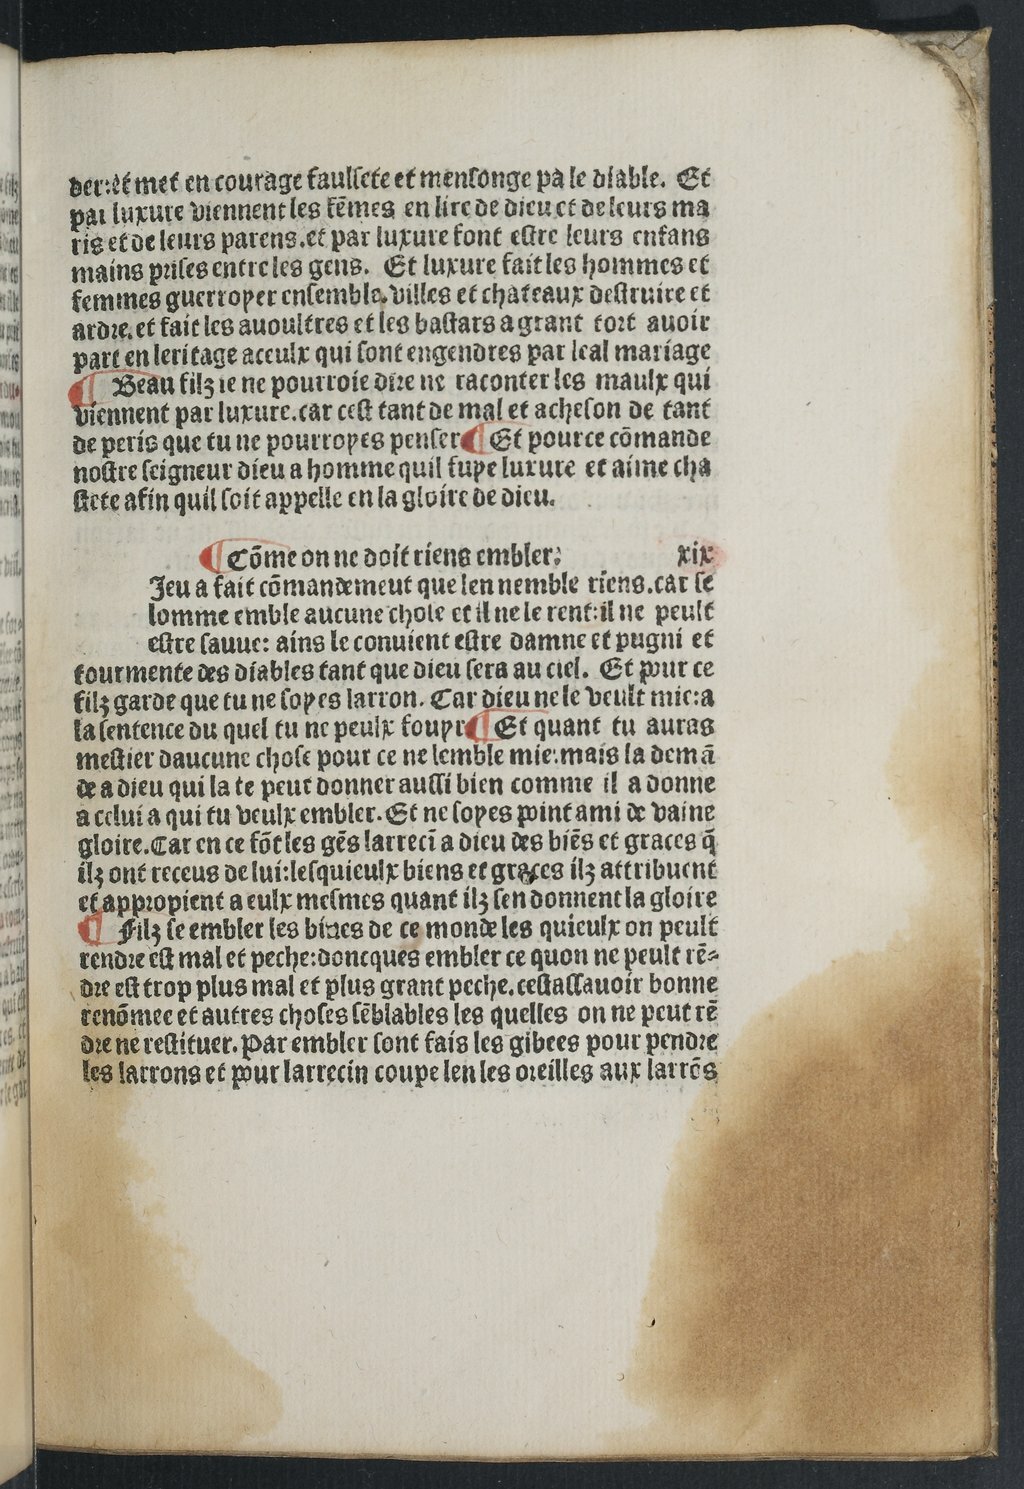 1482 [Antoine Caillaut] Trésor des humains BnF_Page_033.jpg